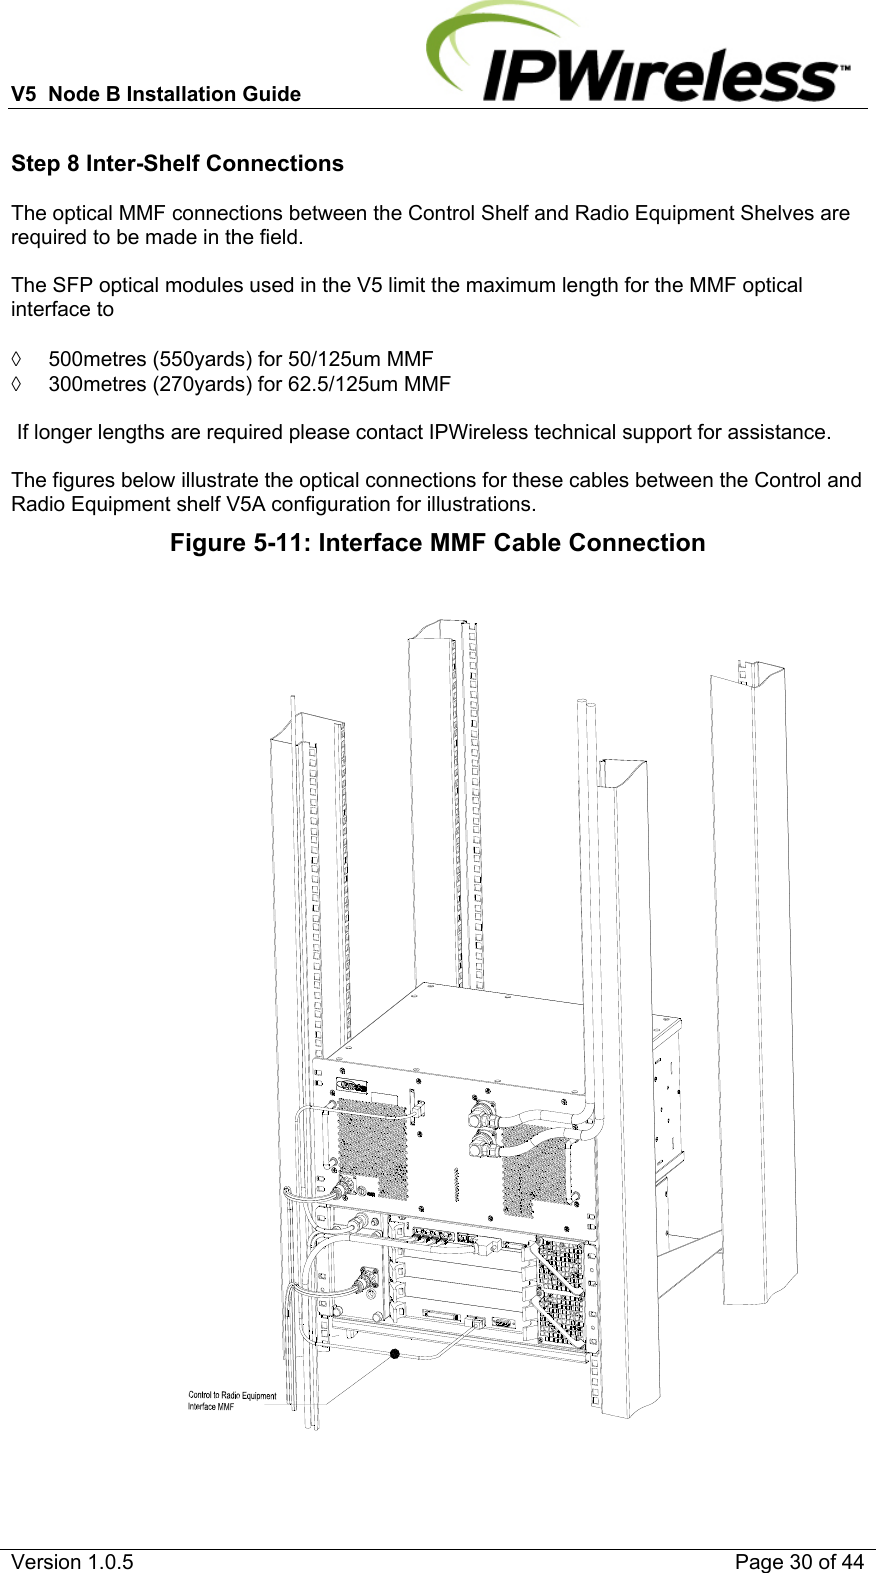 V5  Node B Installation Guide                           Version 1.0.5    Page 30 of 44 Step 8 Inter-Shelf Connections The optical MMF connections between the Control Shelf and Radio Equipment Shelves are required to be made in the field.  The SFP optical modules used in the V5 limit the maximum length for the MMF optical interface to  ◊  500metres (550yards) for 50/125um MMF ◊  300metres (270yards) for 62.5/125um MMF   If longer lengths are required please contact IPWireless technical support for assistance.  The figures below illustrate the optical connections for these cables between the Control and Radio Equipment shelf V5A configuration for illustrations. Figure 5-11: Interface MMF Cable Connection  